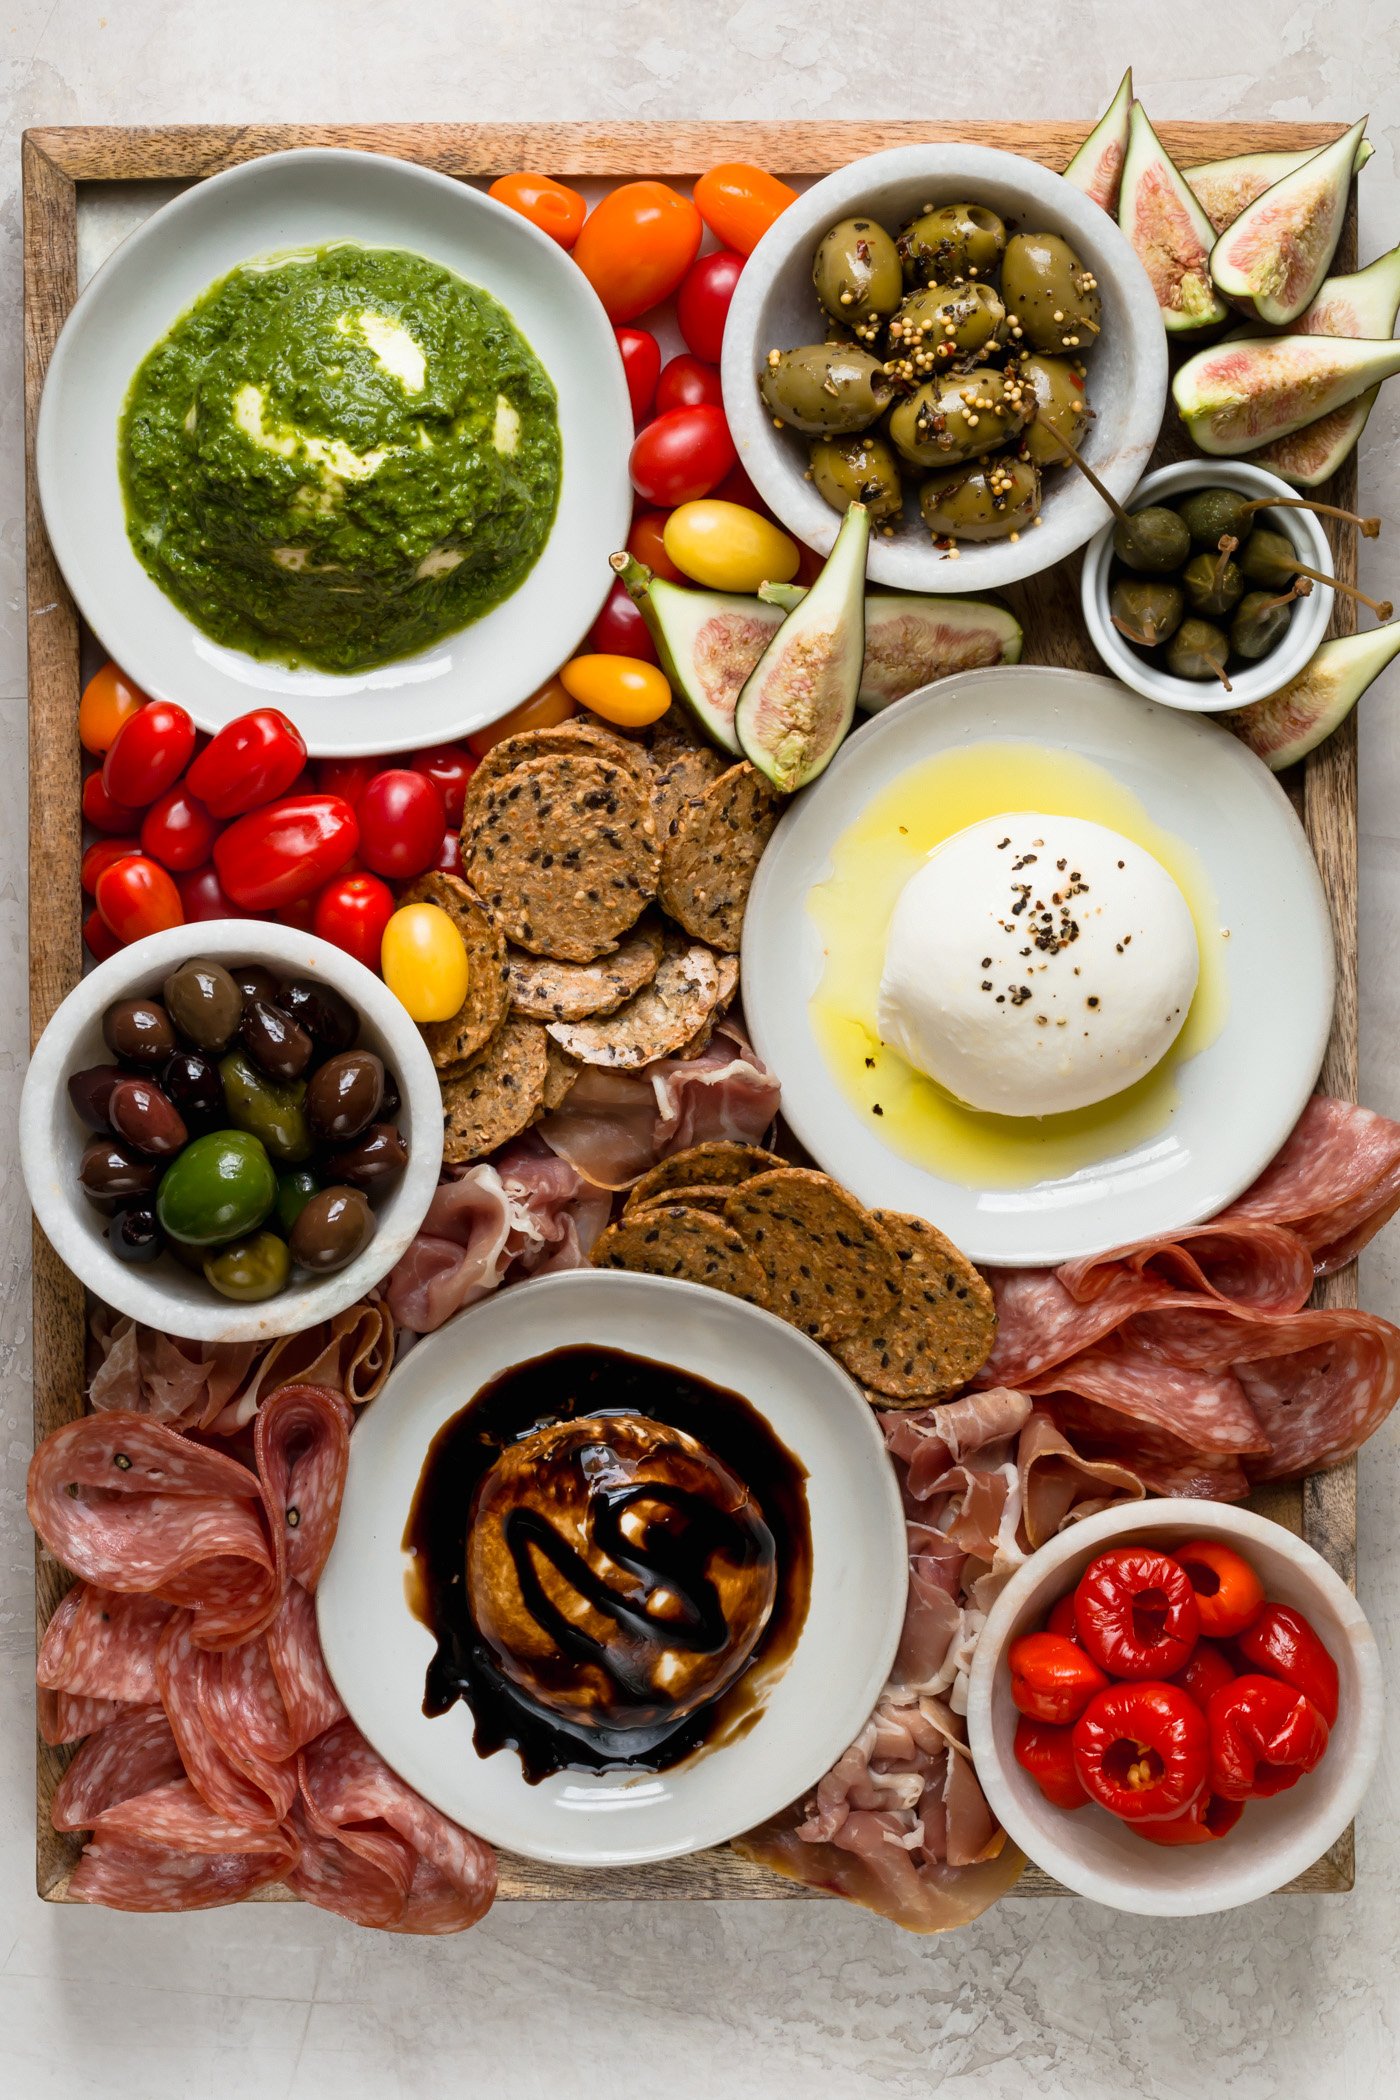 the ultimate burrata cheese board!!! this burrata cheese board has burrata three ways (truffle! balsamic! pesto!) & served alongside all the best cheese board snacks. the perfect easy & totally impressive party snack or dish to share whenever you’re entertaining! #playswellwithbutter #burrata #burrataappetizers #howtoserveburrata #cheeseboard #partyfood #partyappetizers #cheeseboardideas #easycheeseboard #howtomakeacheeseboard 